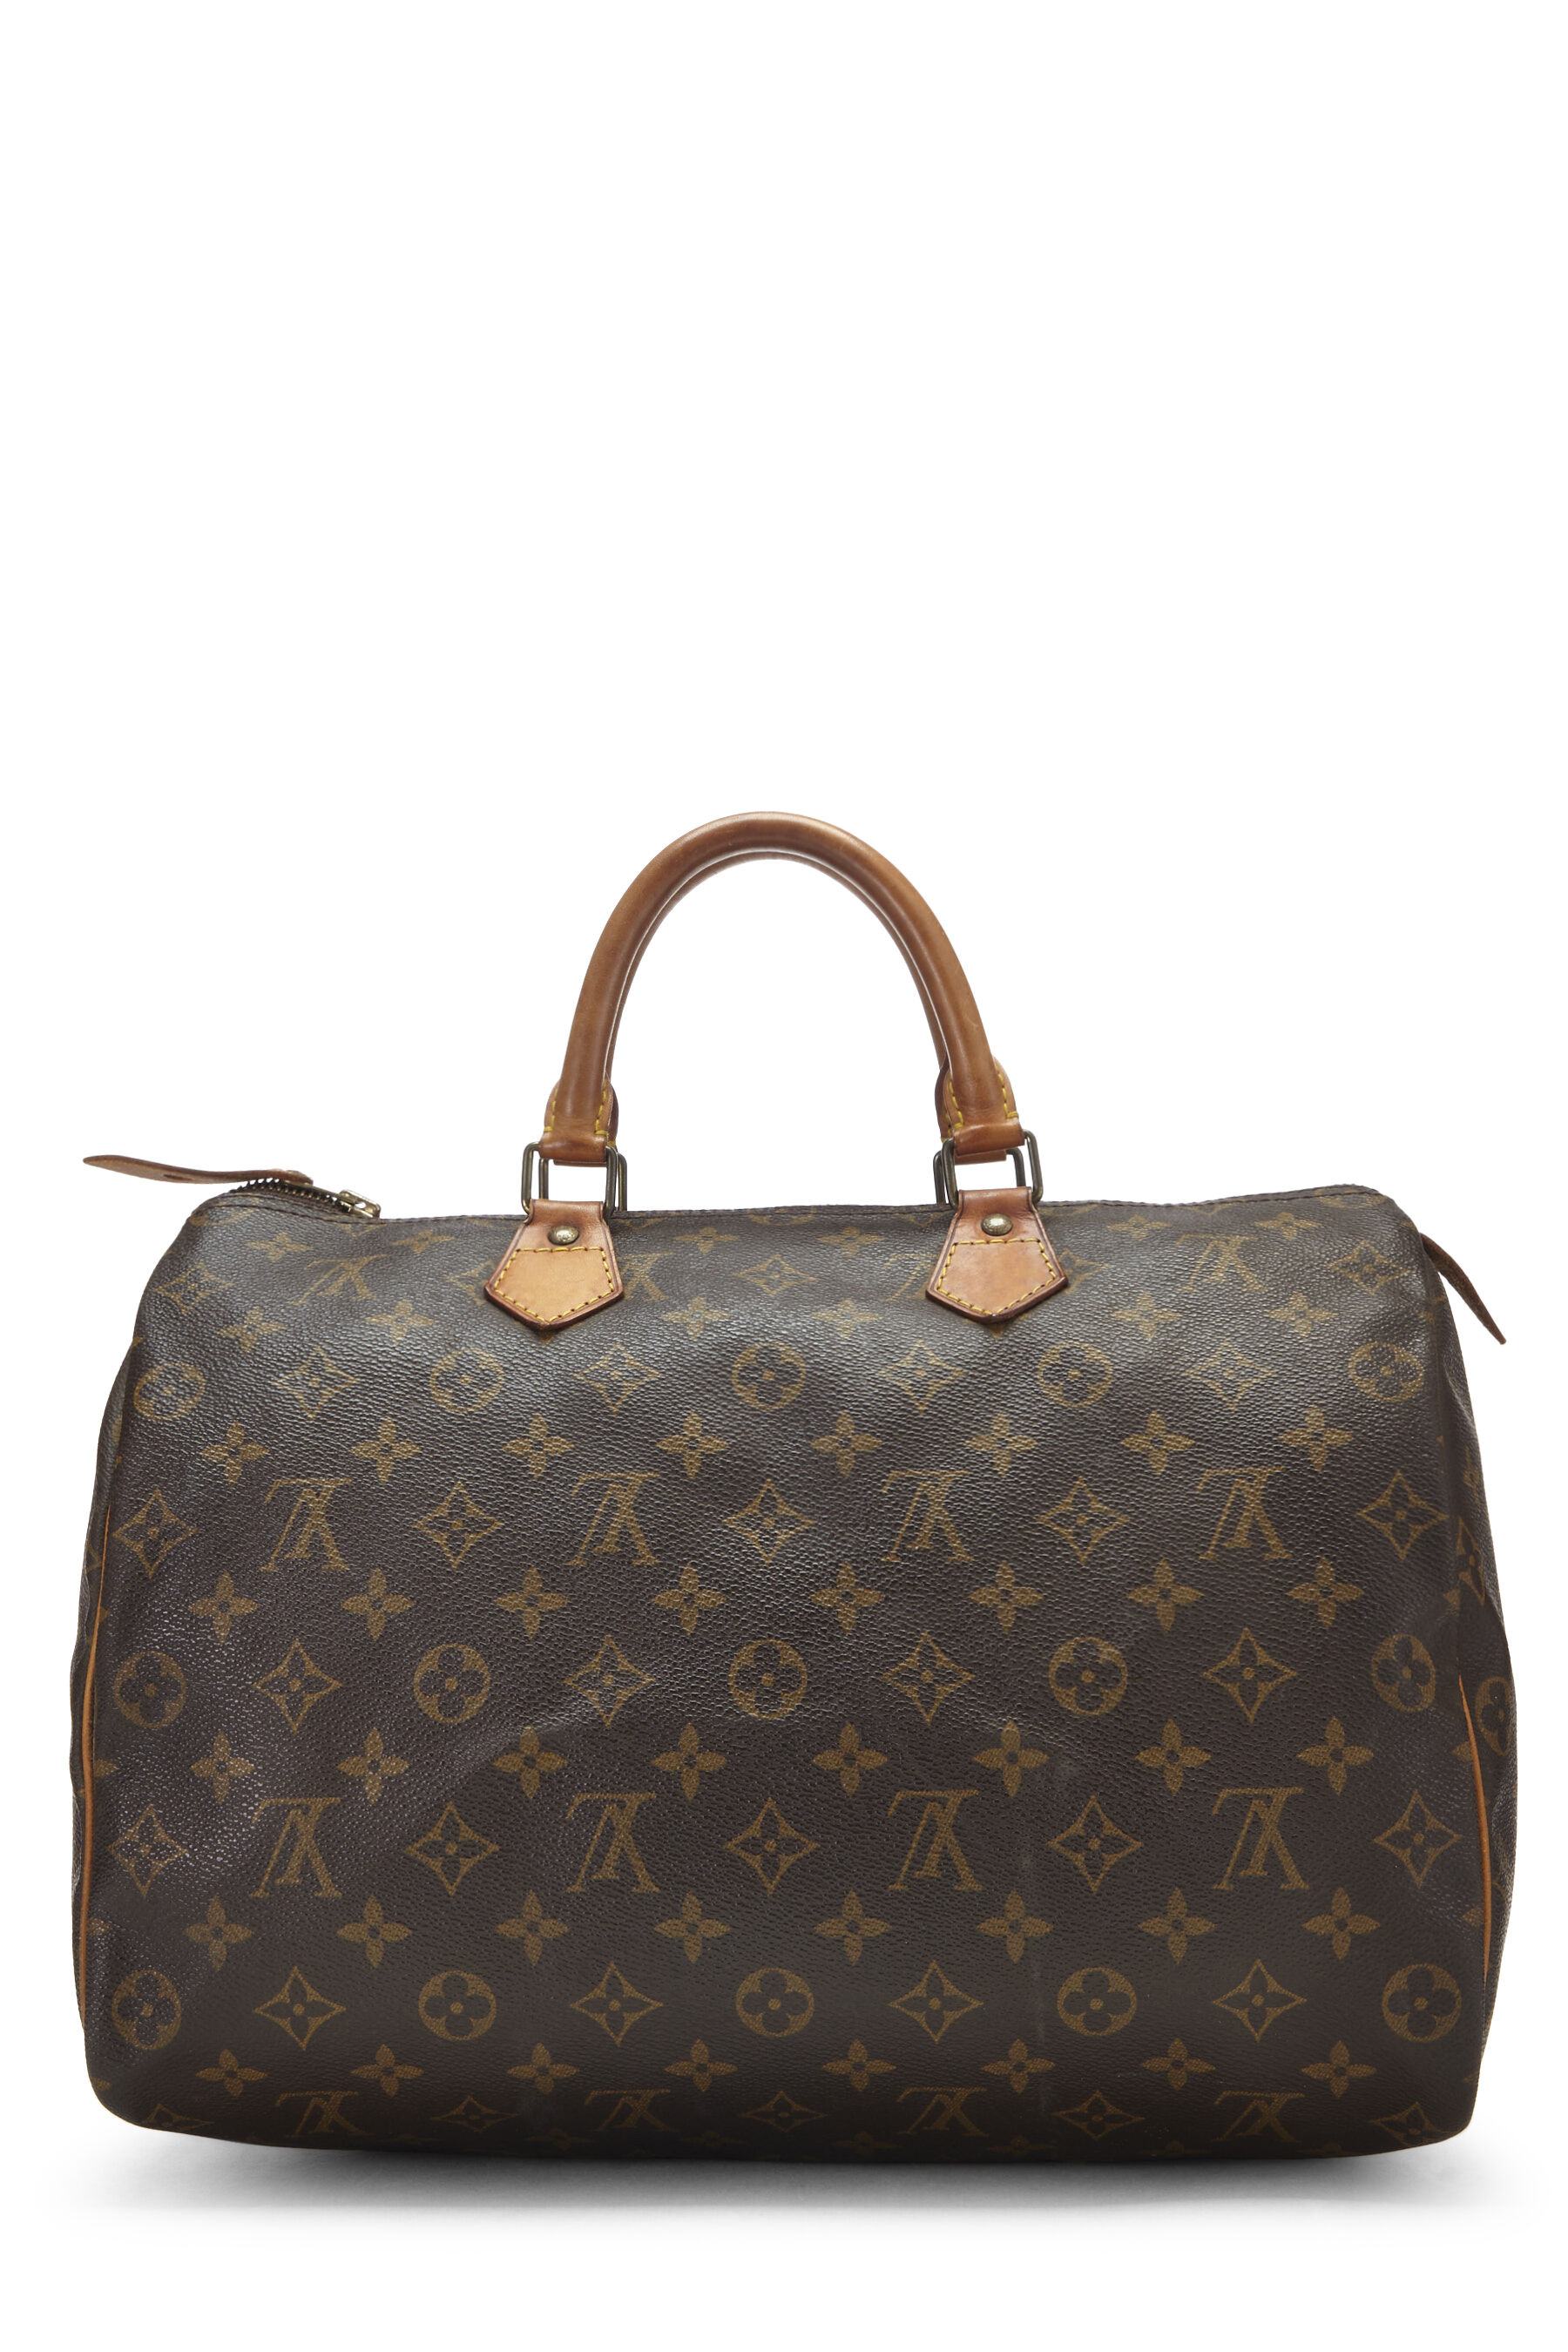 Speedy 35 - Louis Vuitton  Speedy 35 - Louis Vuitton by Lola Collective  Bags